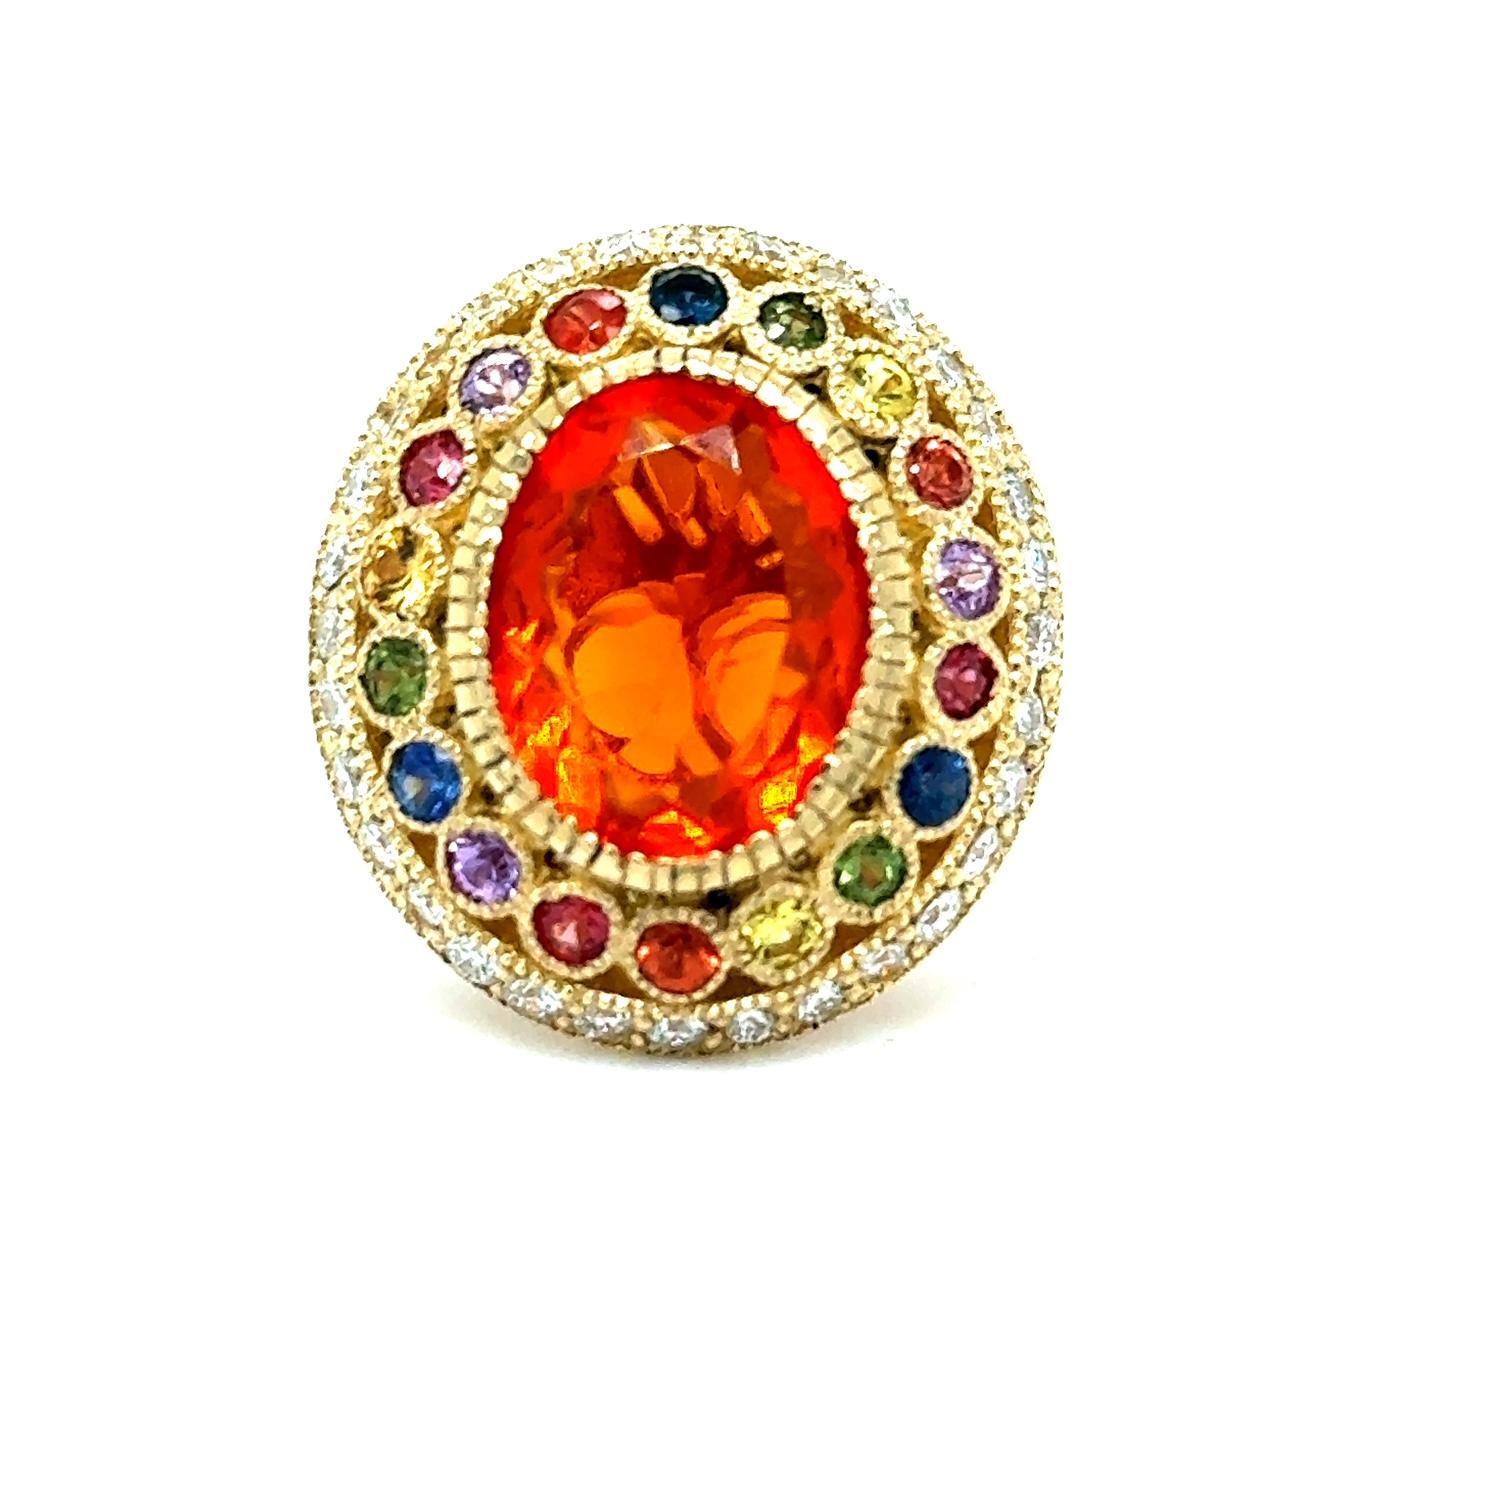 5.14 Carat Natural Fire Opal Sapphire and Diamond Yellow Gold Cocktail Ring

This ring has a beautiful 3.17 Carat Oval Cut Natural Orange Fire Opal as its center stone and is elegantly surrounded by 24 Round Cut Multi-Colored Natural Sapphires that